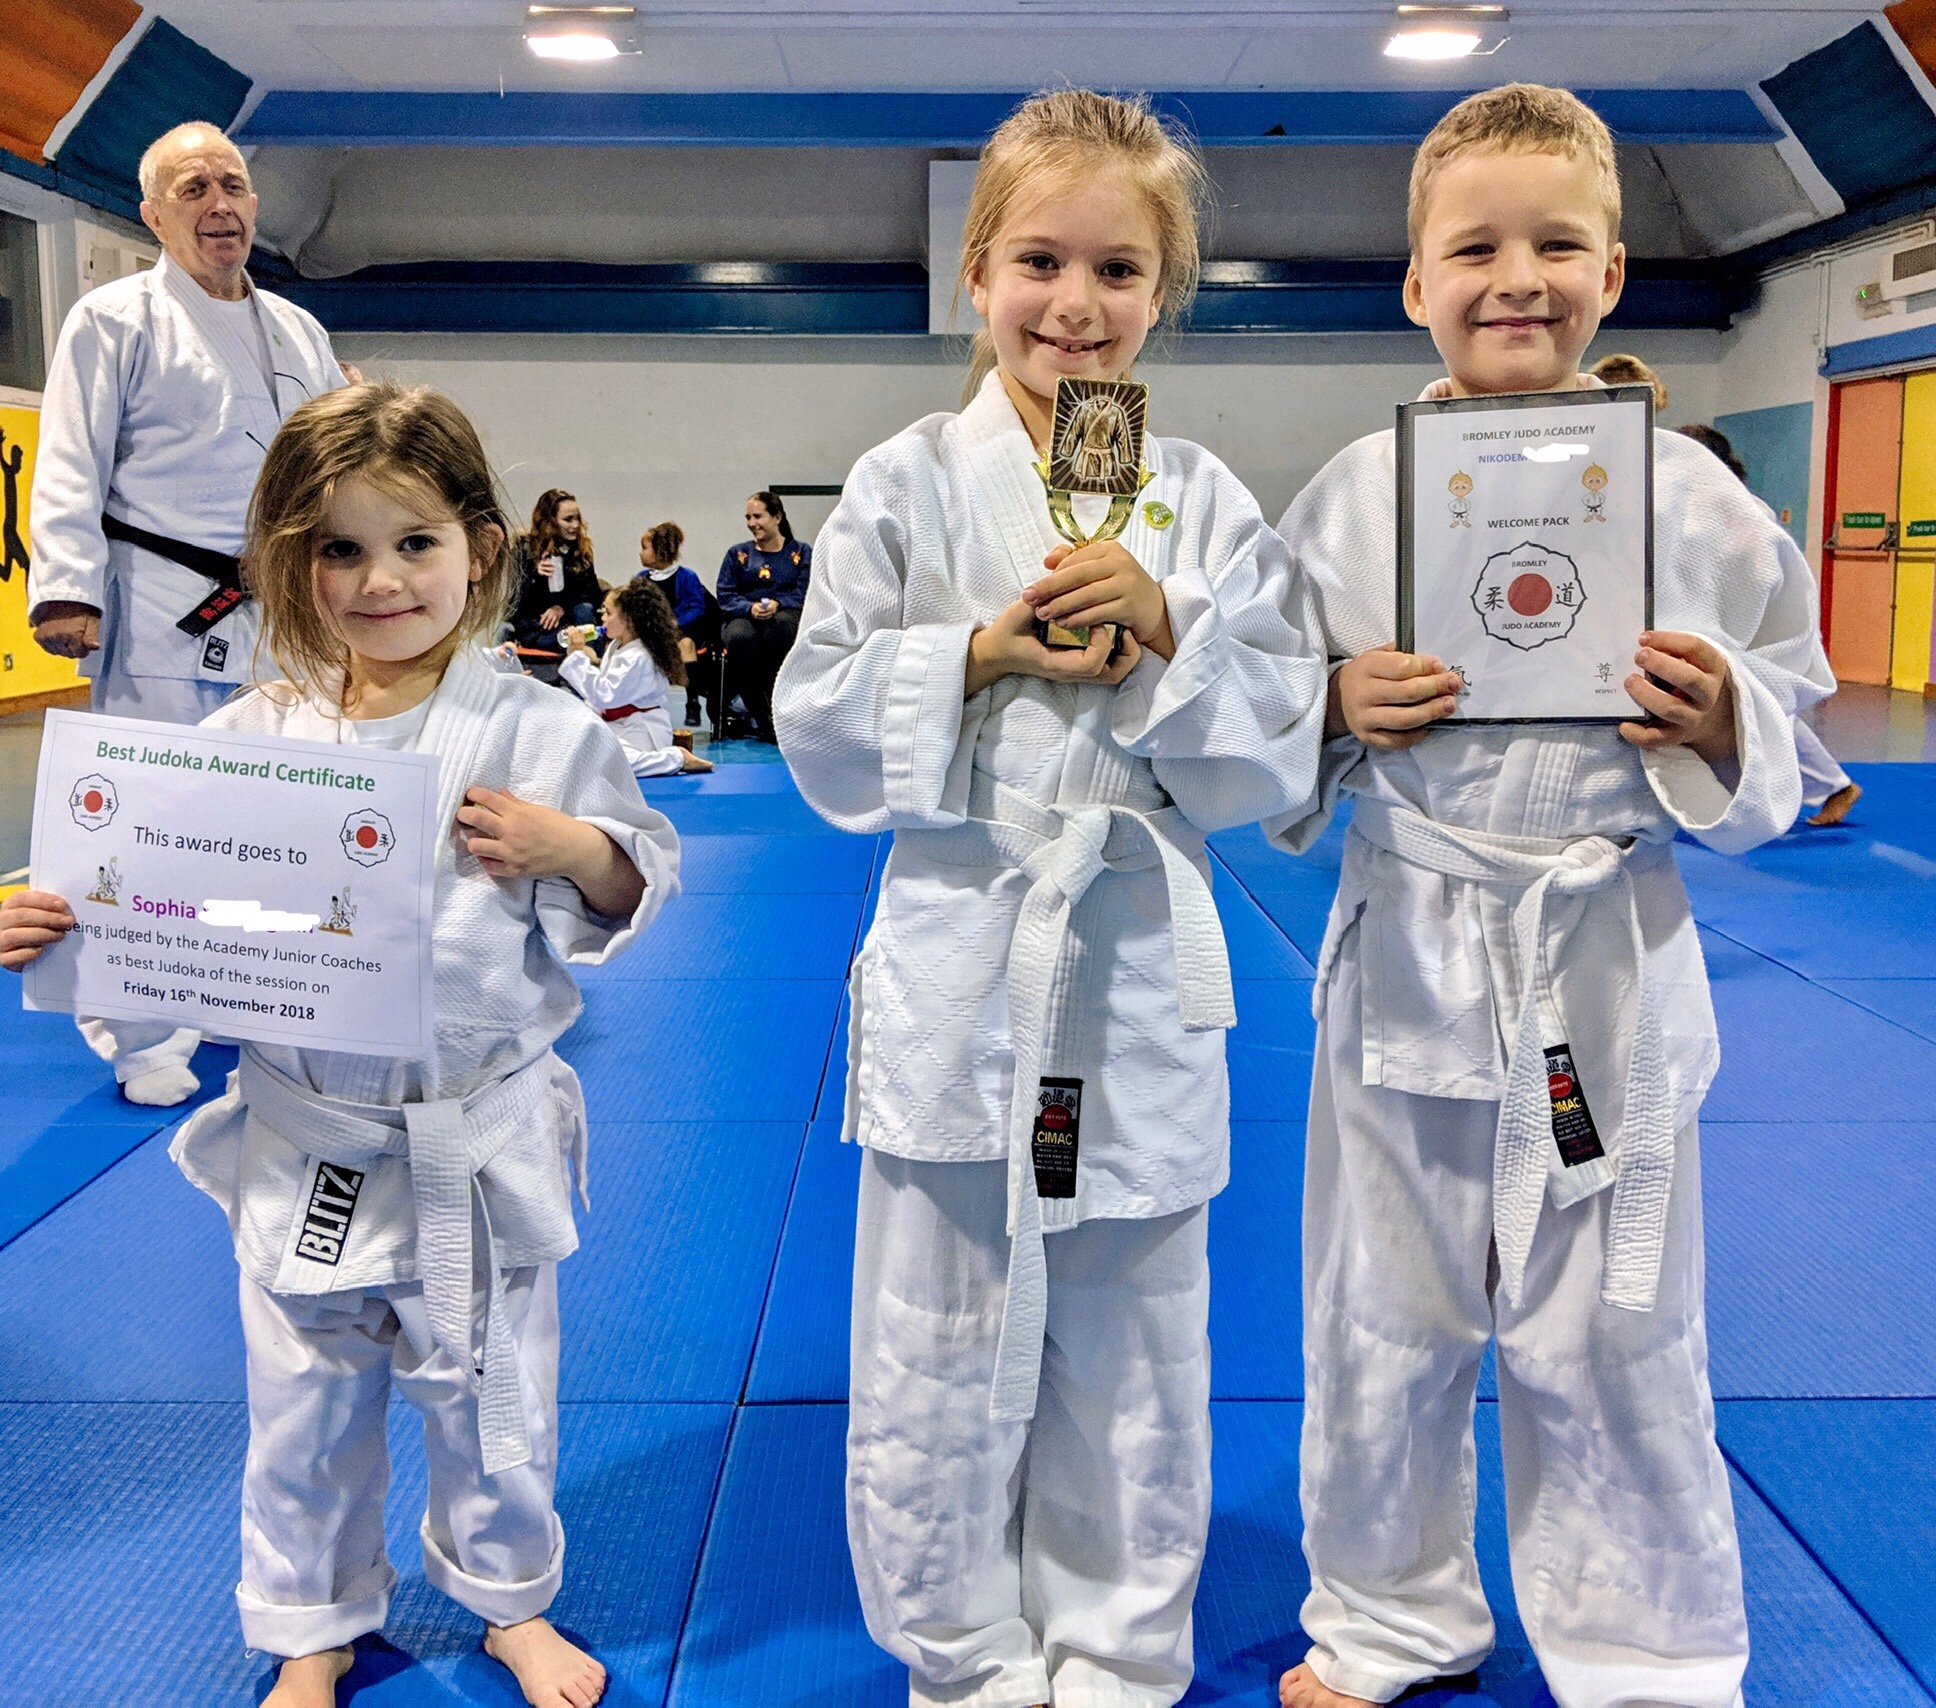 Bromley Judo Academy's trophy and certificate winners